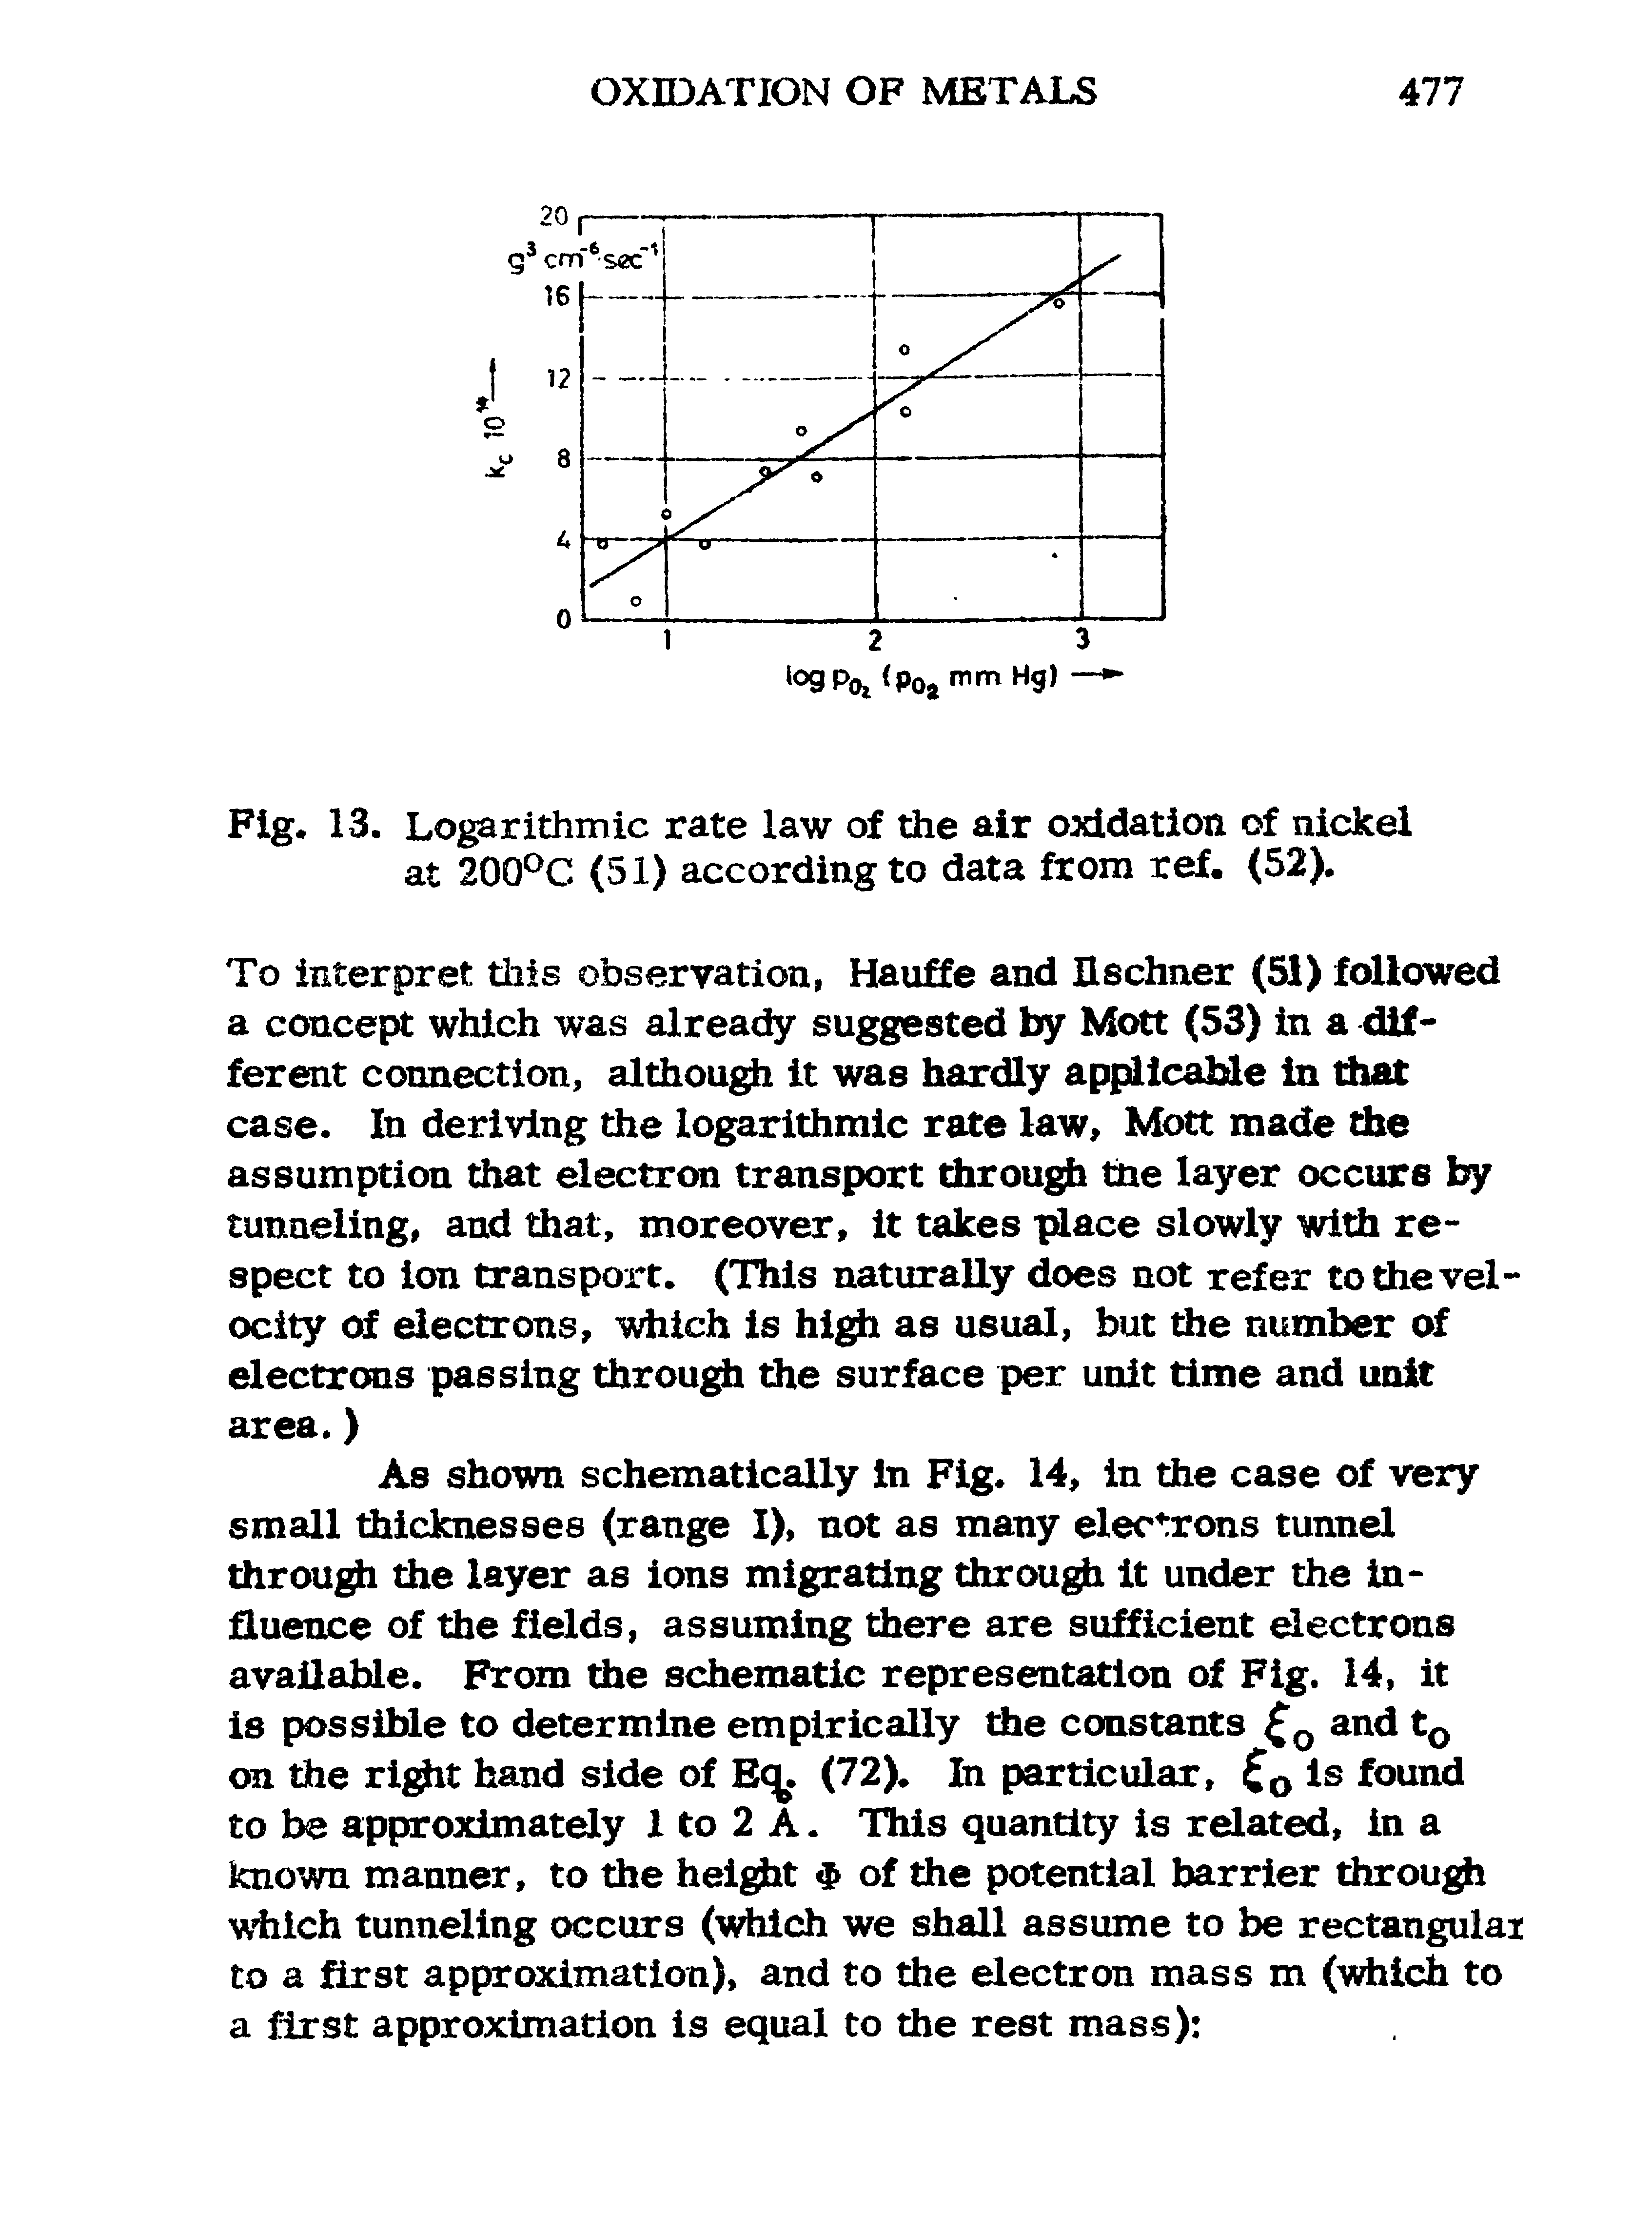 Fig. 13. Logarithmic rate law of the air oxidation of nickel at 200°C (51) according to data from ref. (52).